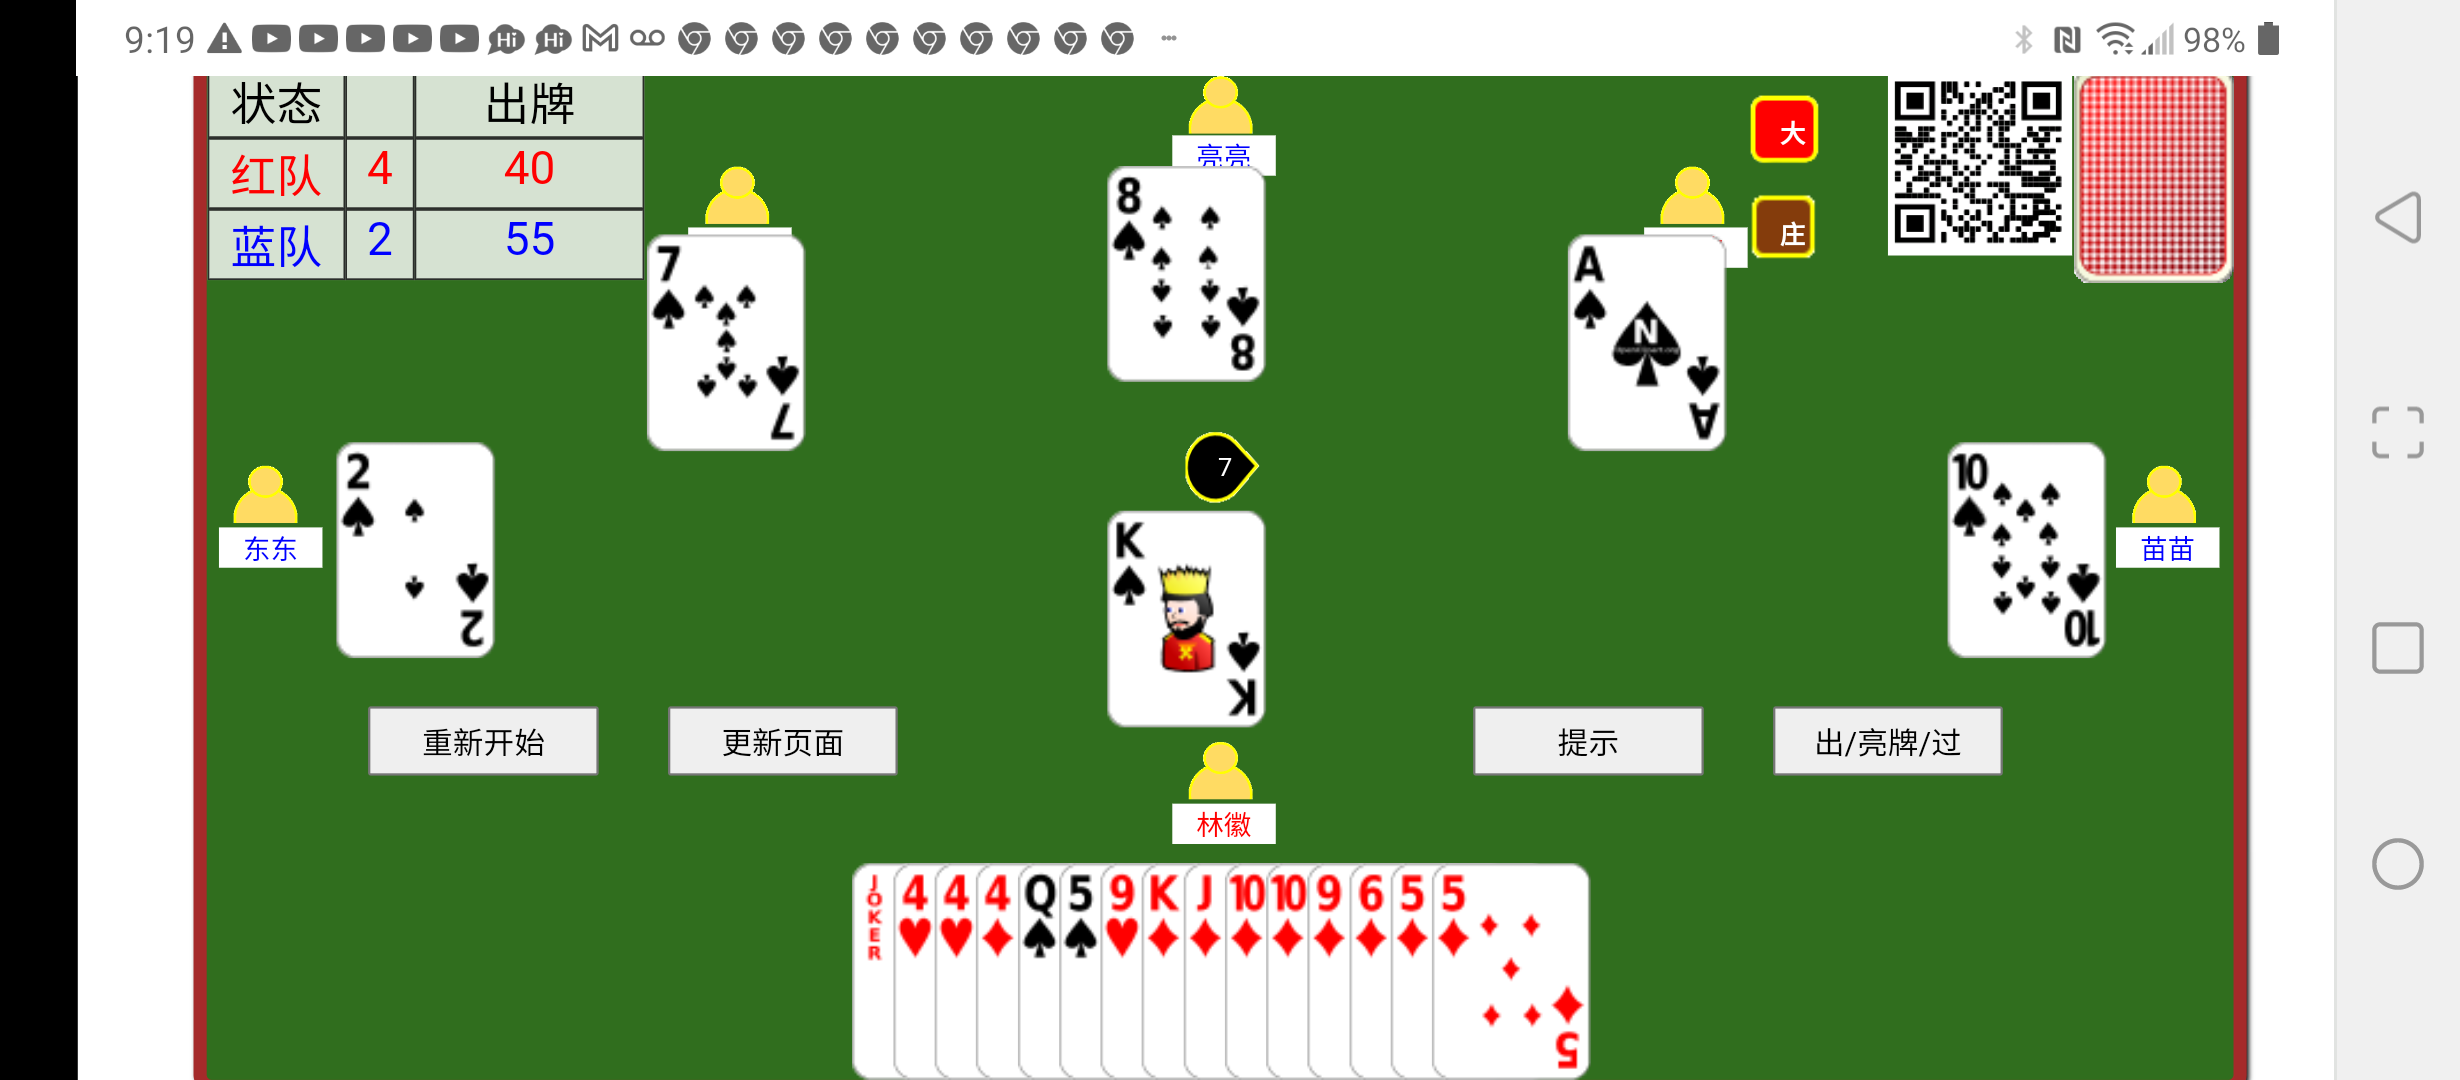 html5 tractor card game Screenshot_20220116-091921.png